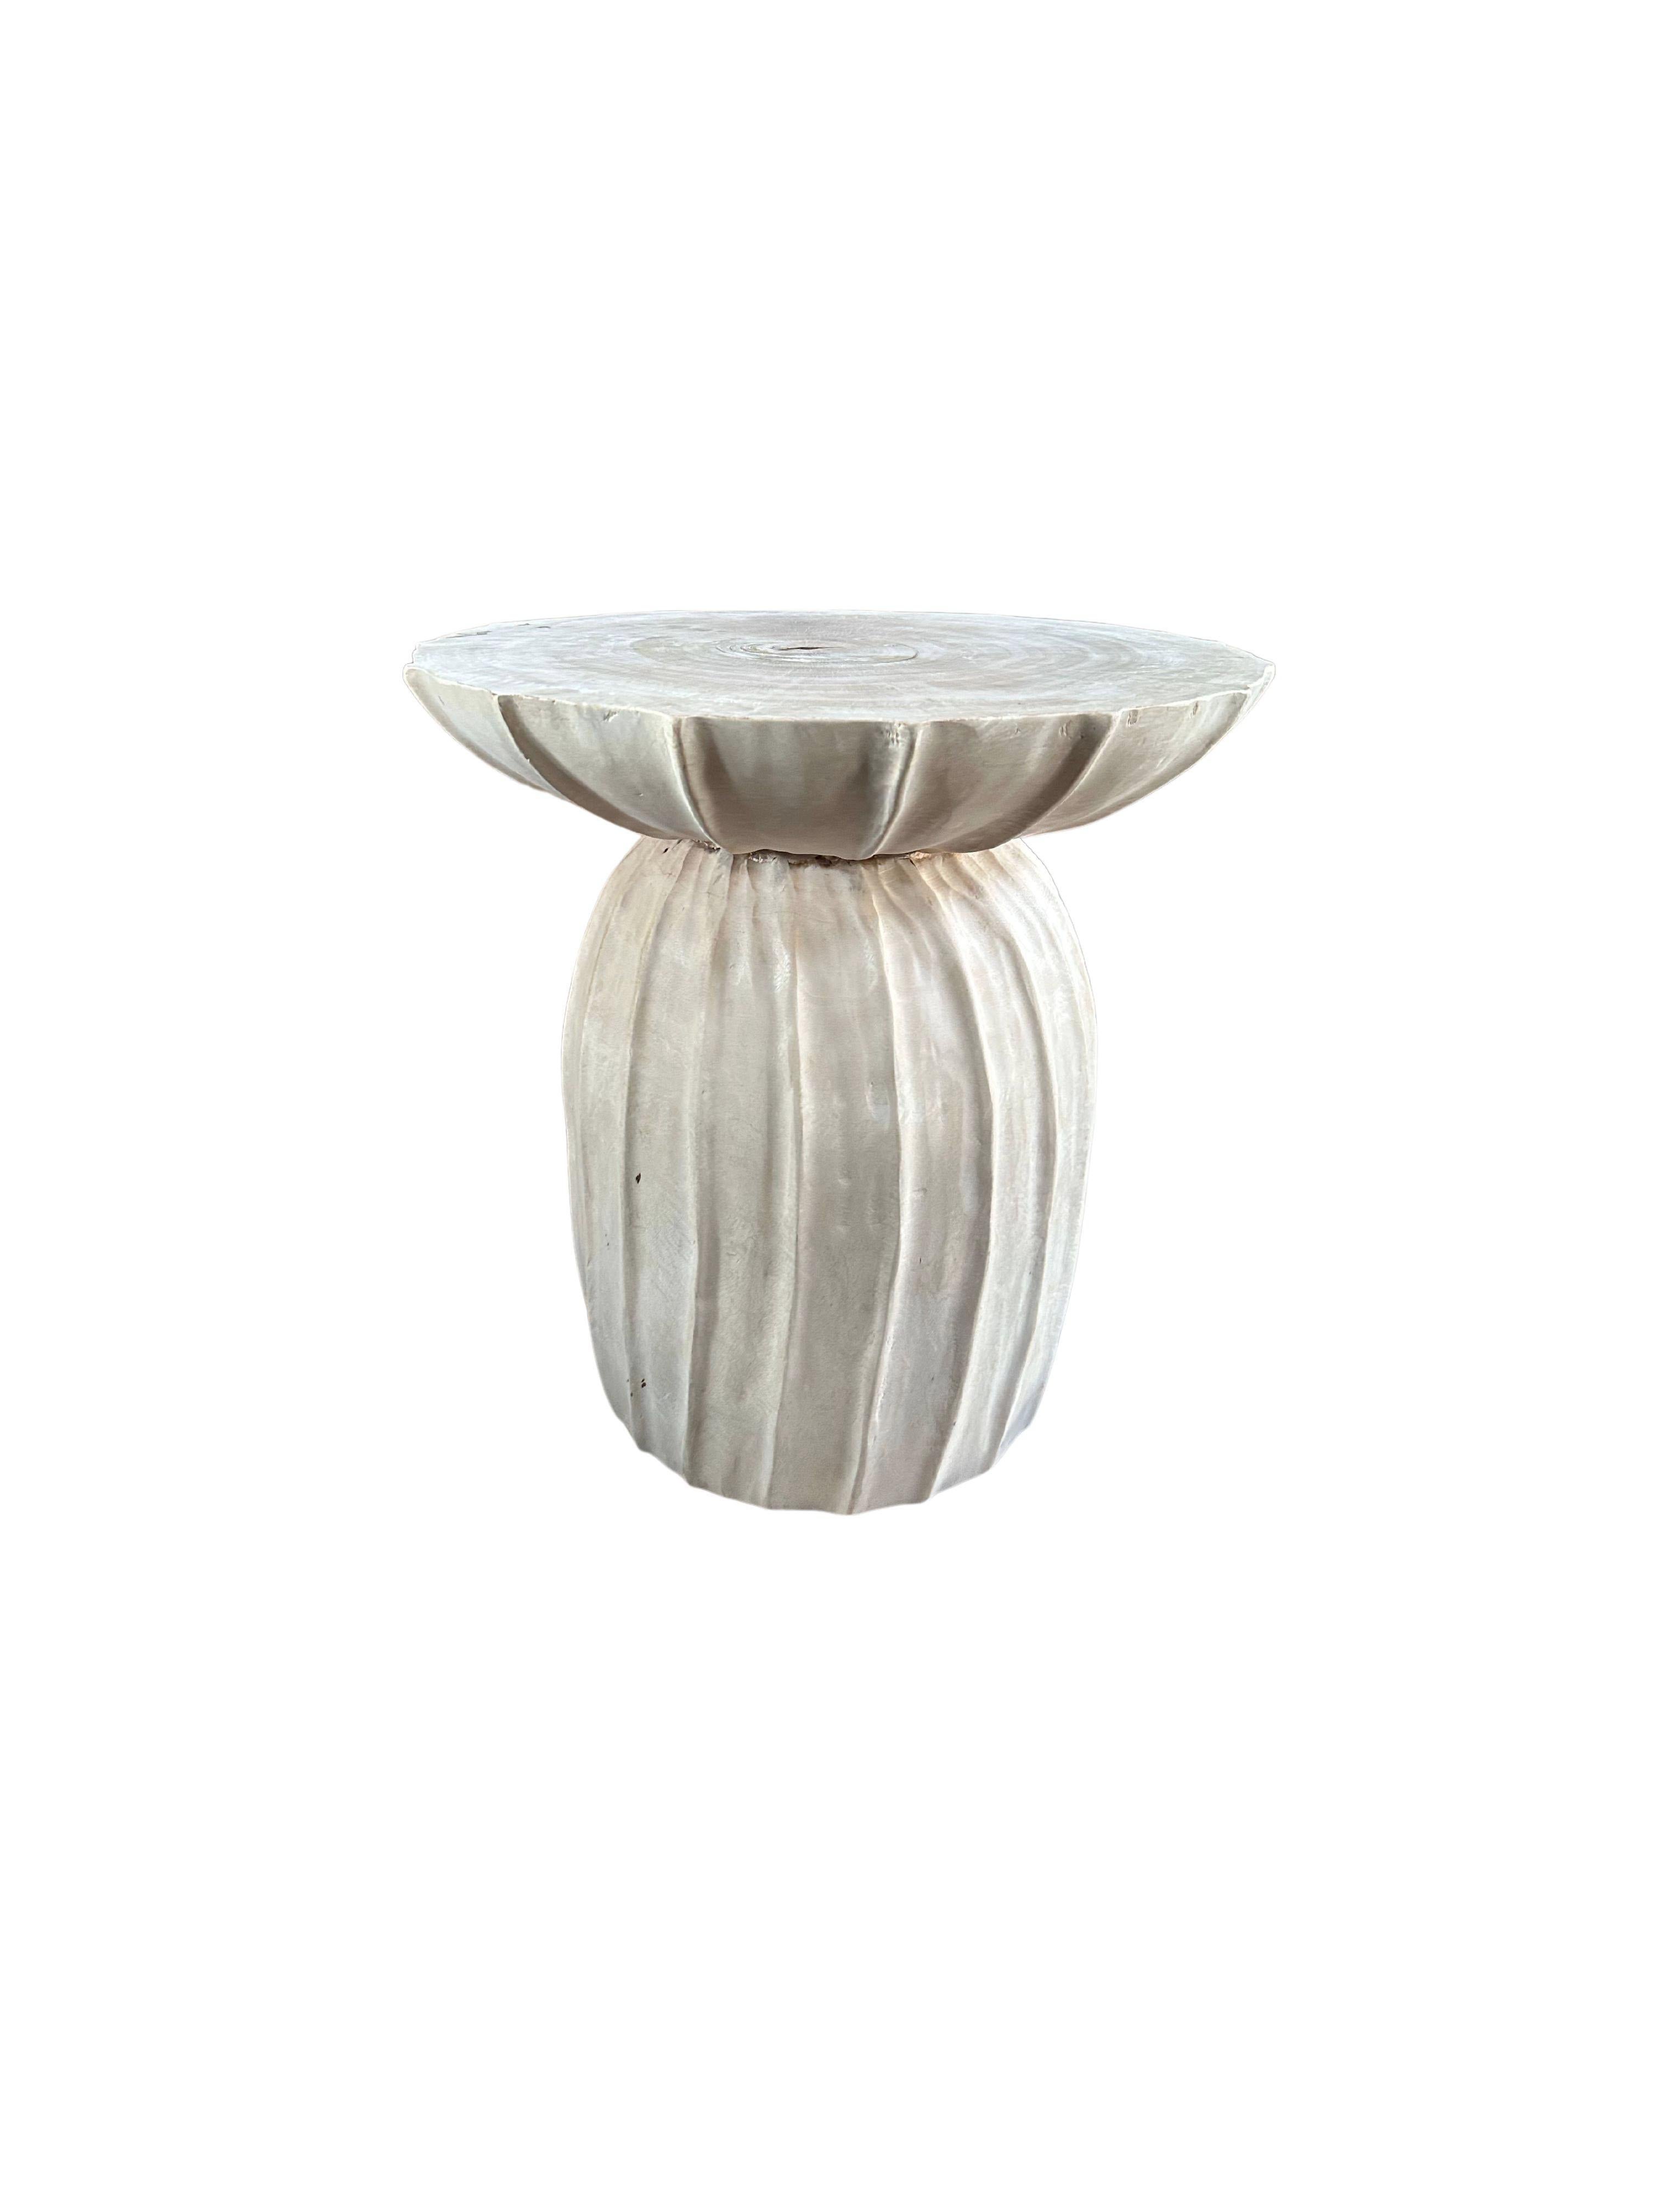 This wonderfully sculptural round side table features a ribbed pattern along its sides. The table's neutral pigment makes it perfect for any space. It was crafted from a solid block of mango wood and has elegant contours resembling a flowing form.